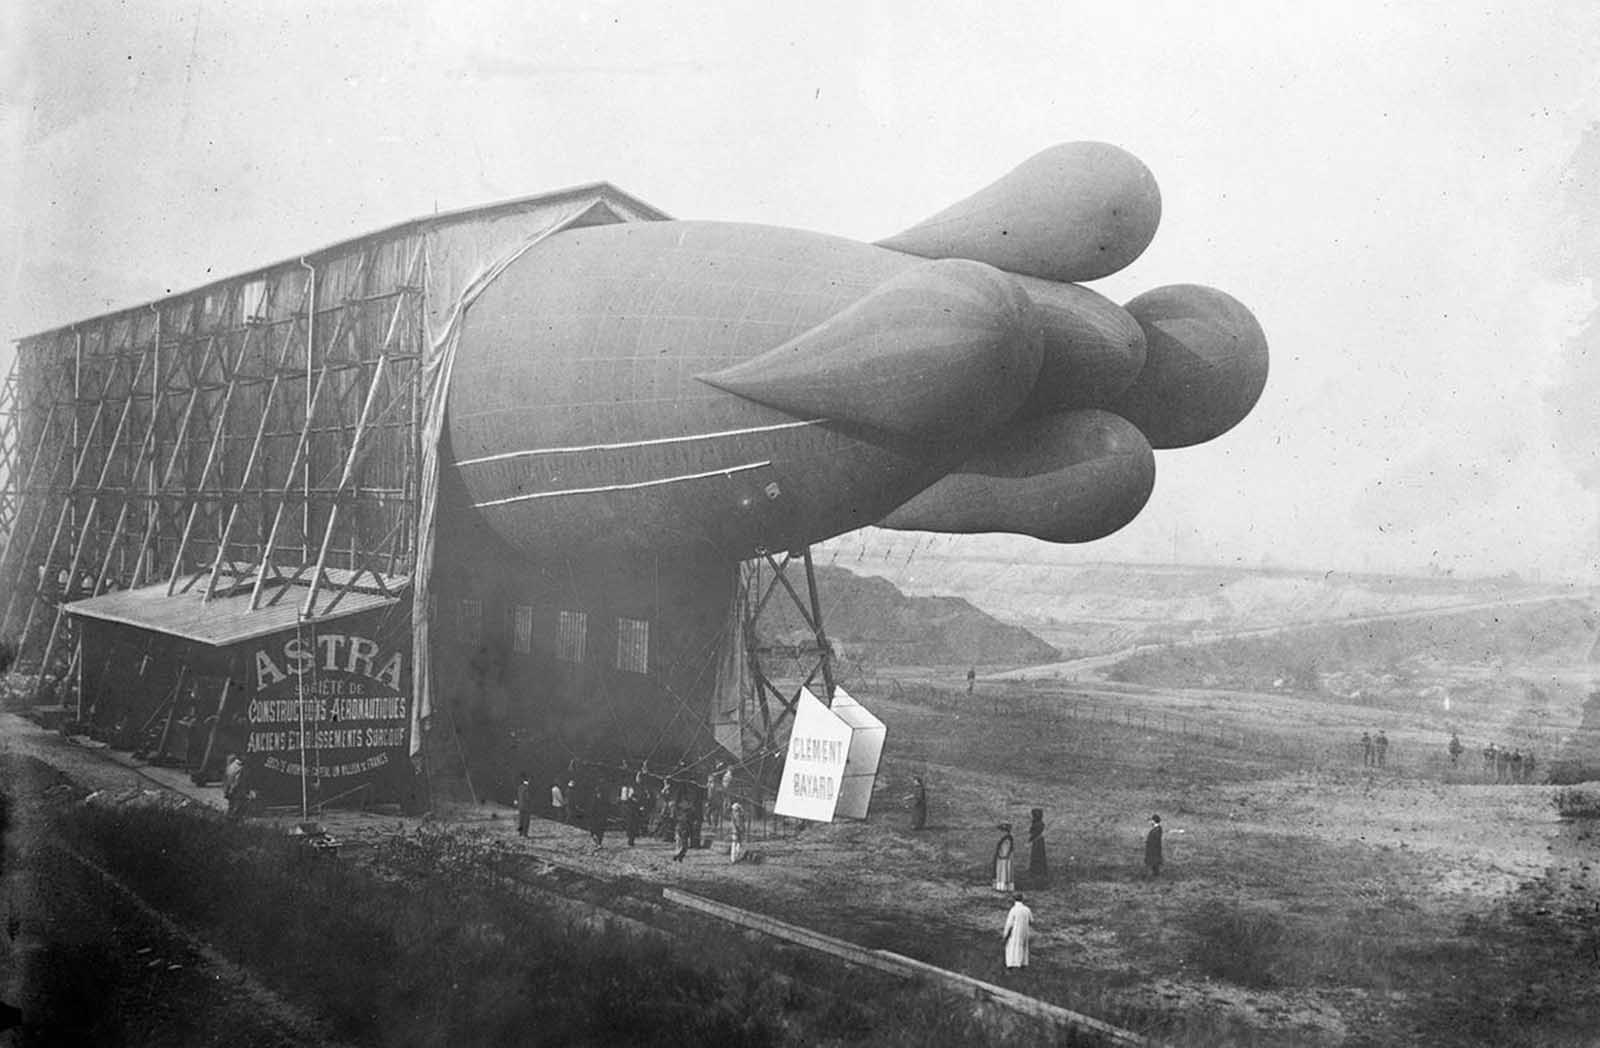 A Clement-Bayard dirigible in shed, France, ca 1908. The lobes on the tail, meant for stability, were removed form later models, as they were found to slow the craft in the air.